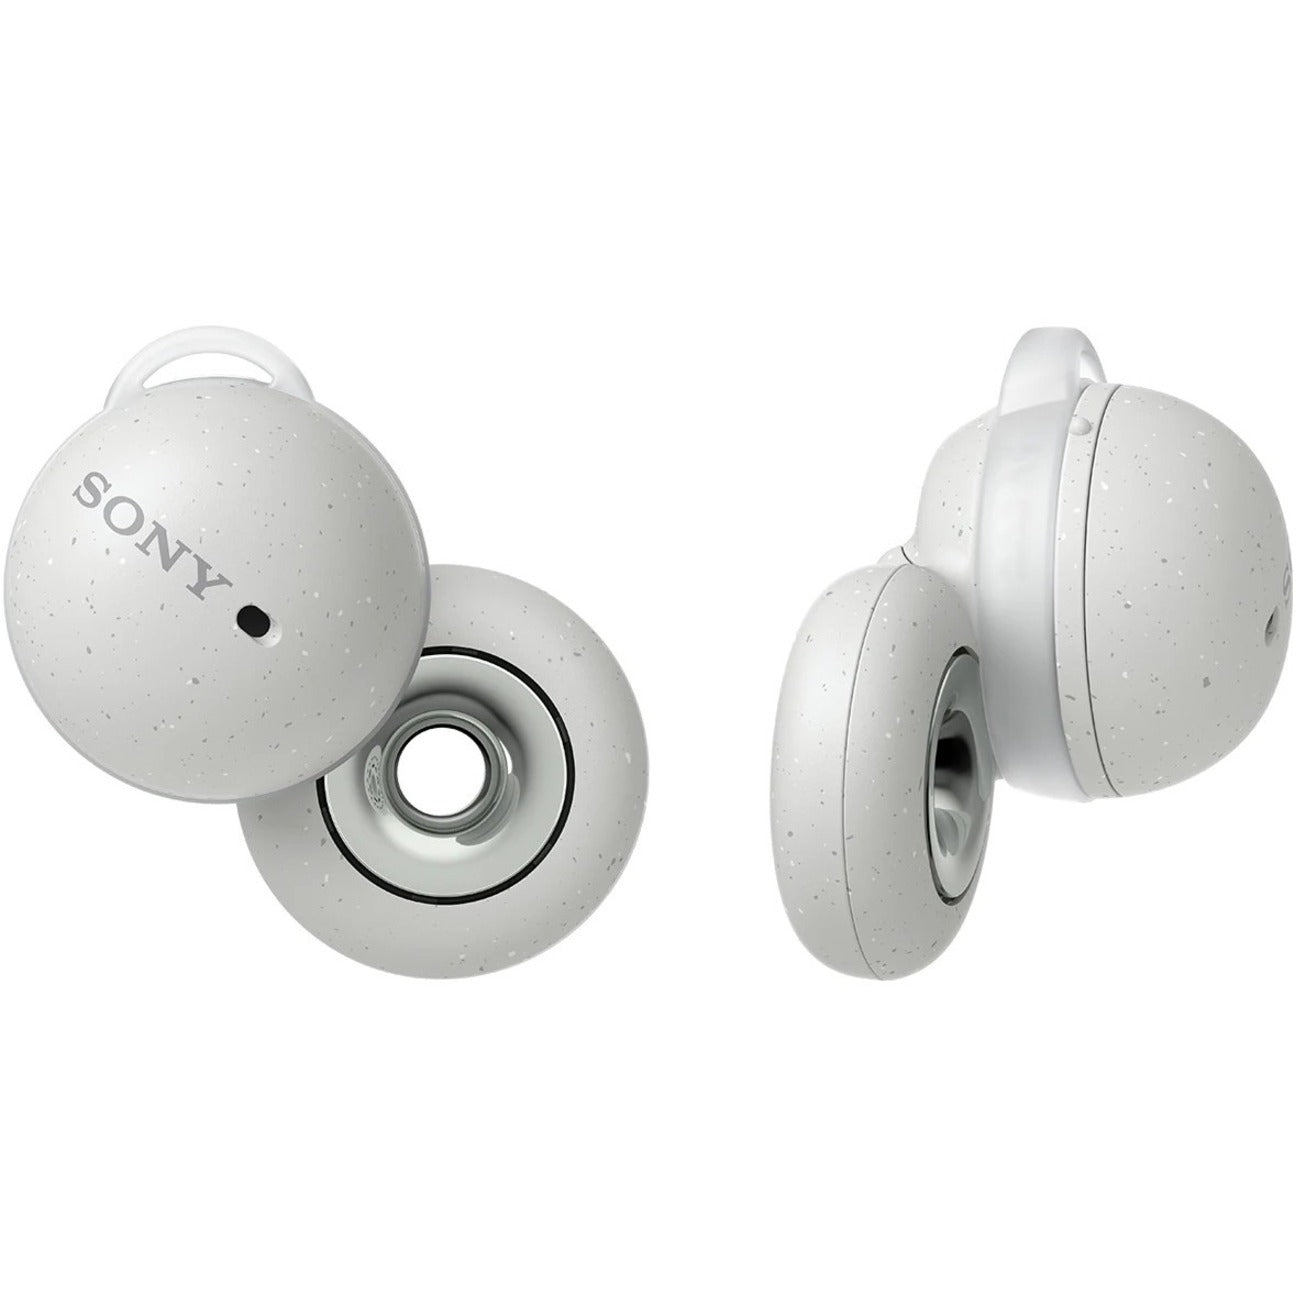 Sony WFL900/W LinkBuds True Wireless Earbuds, Open-Ear Earbuds with Advanced Audio, Comfortable Fit, and Voice Assistant